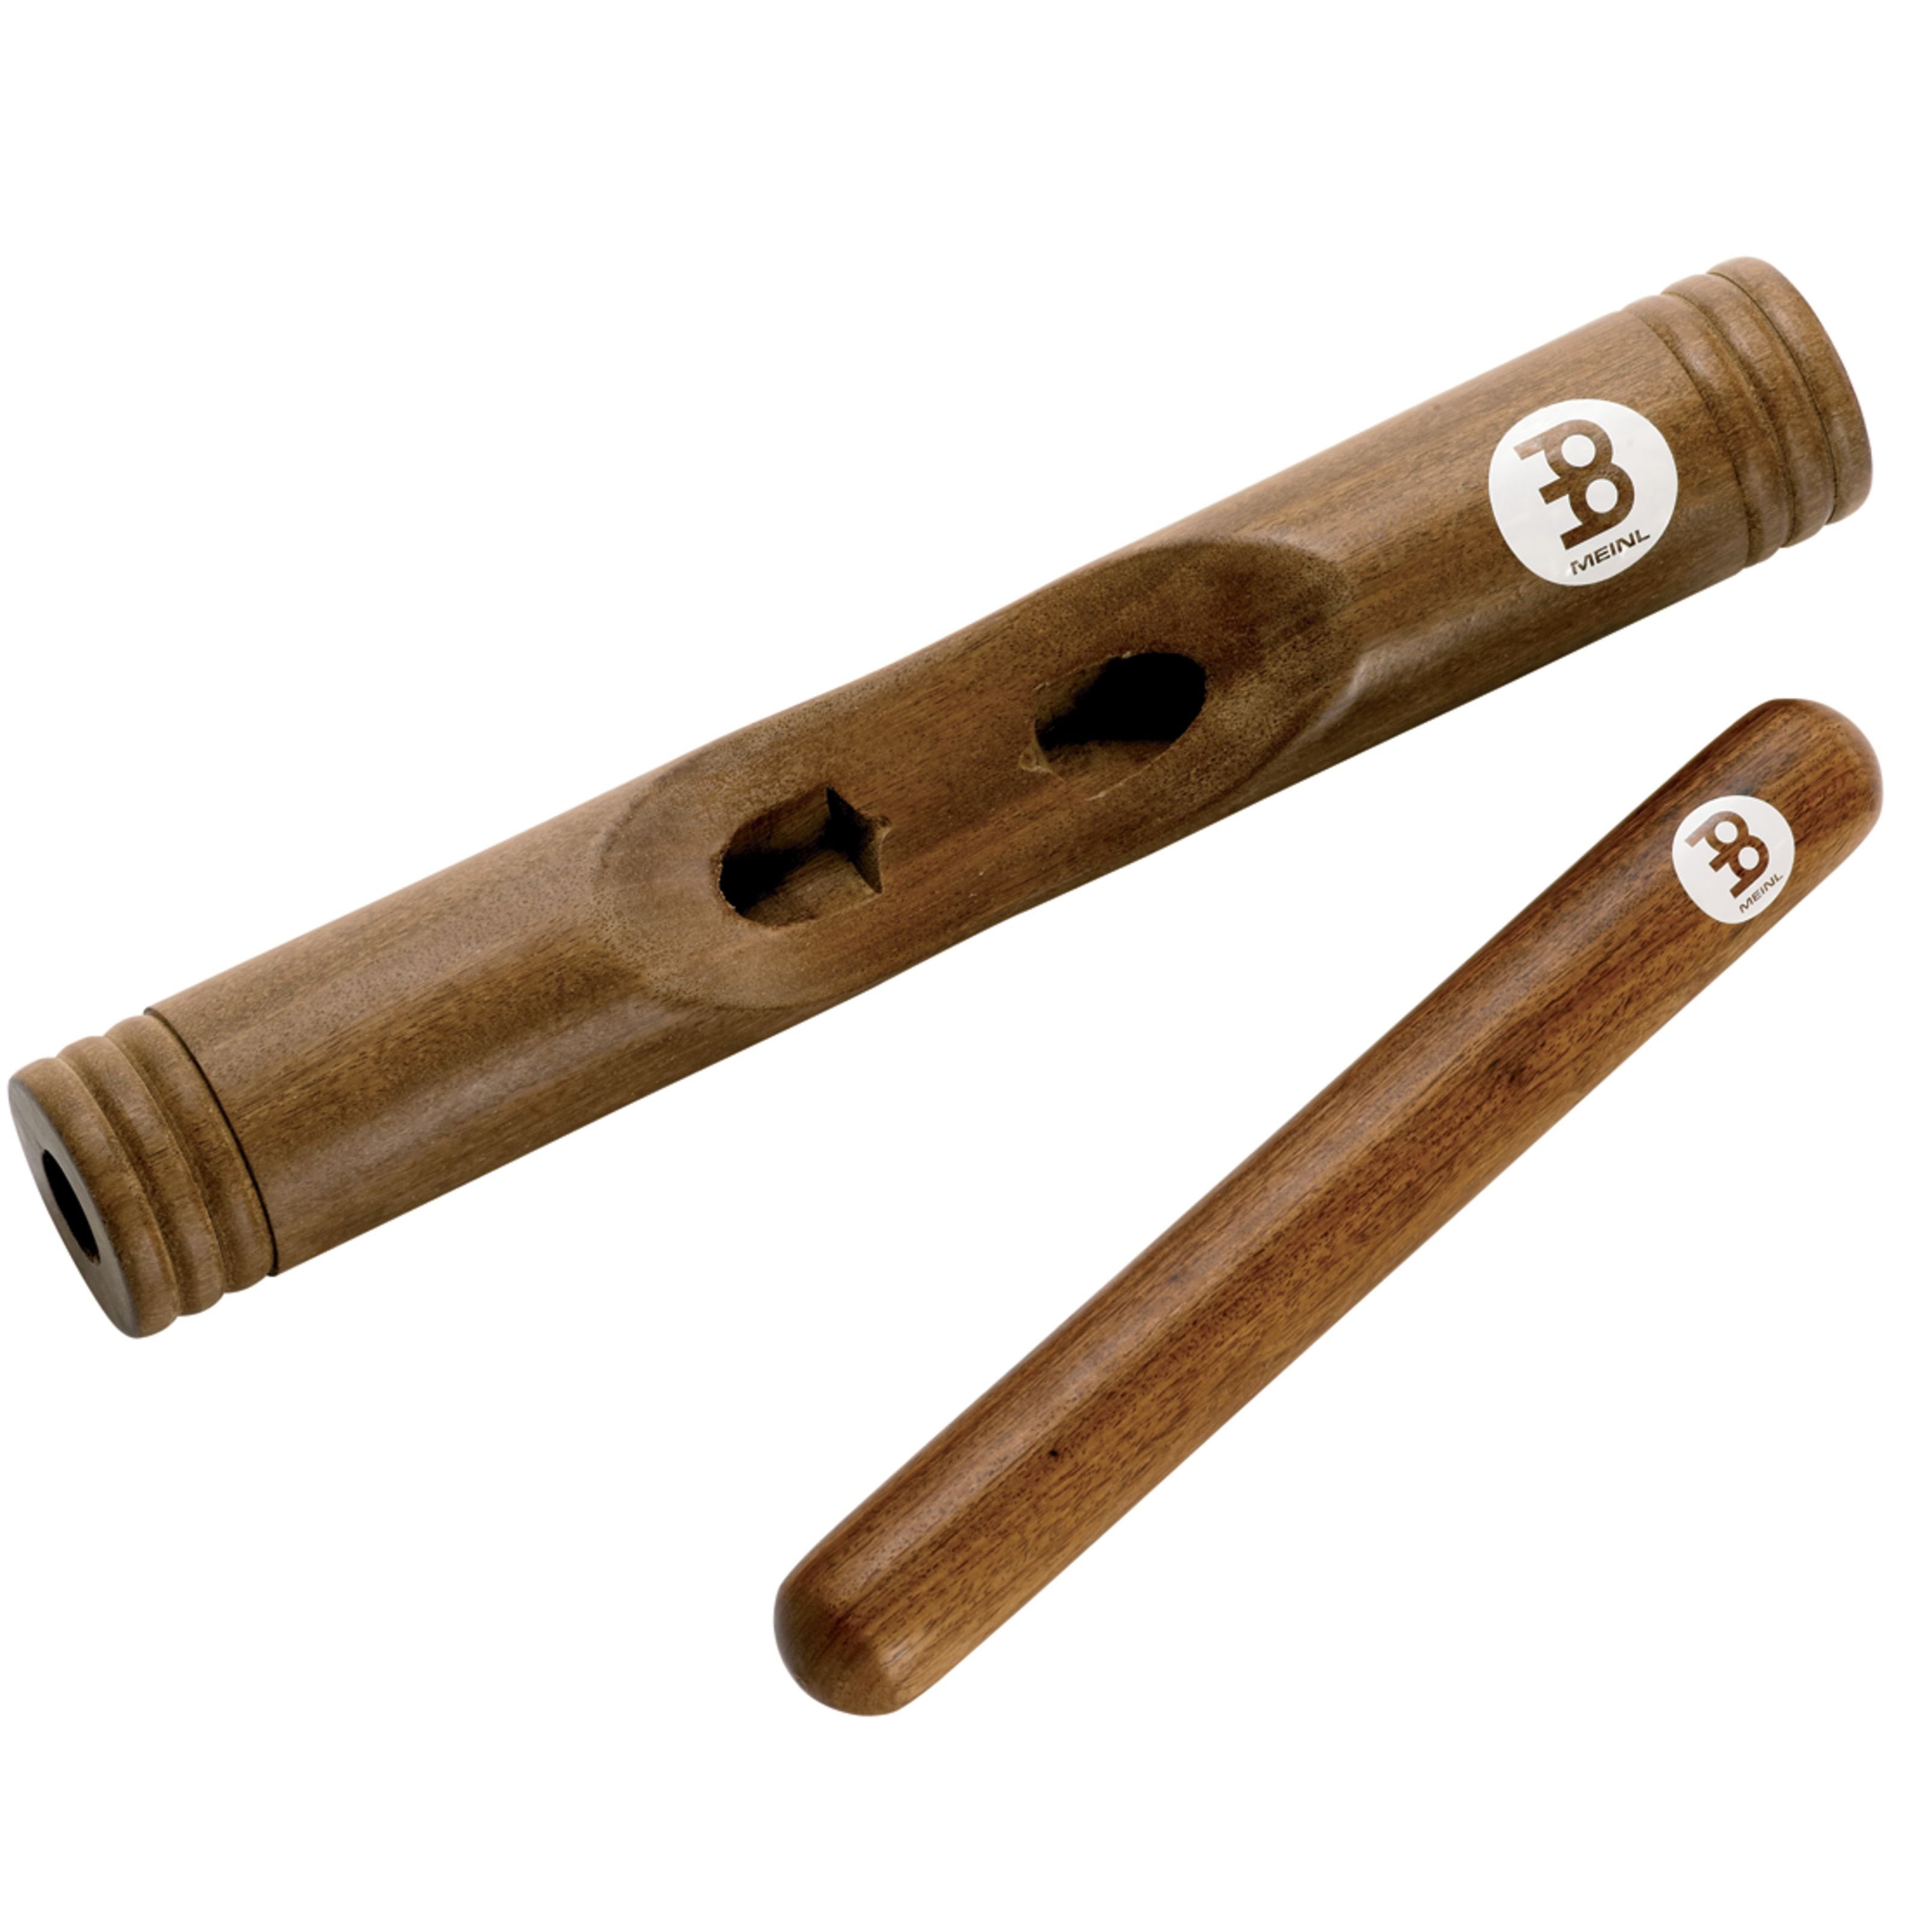 Meinl Percussion Claves,CL3RW African Wood Claves, Redwood, CL3RW African Wood Claves, Redwood - Claves